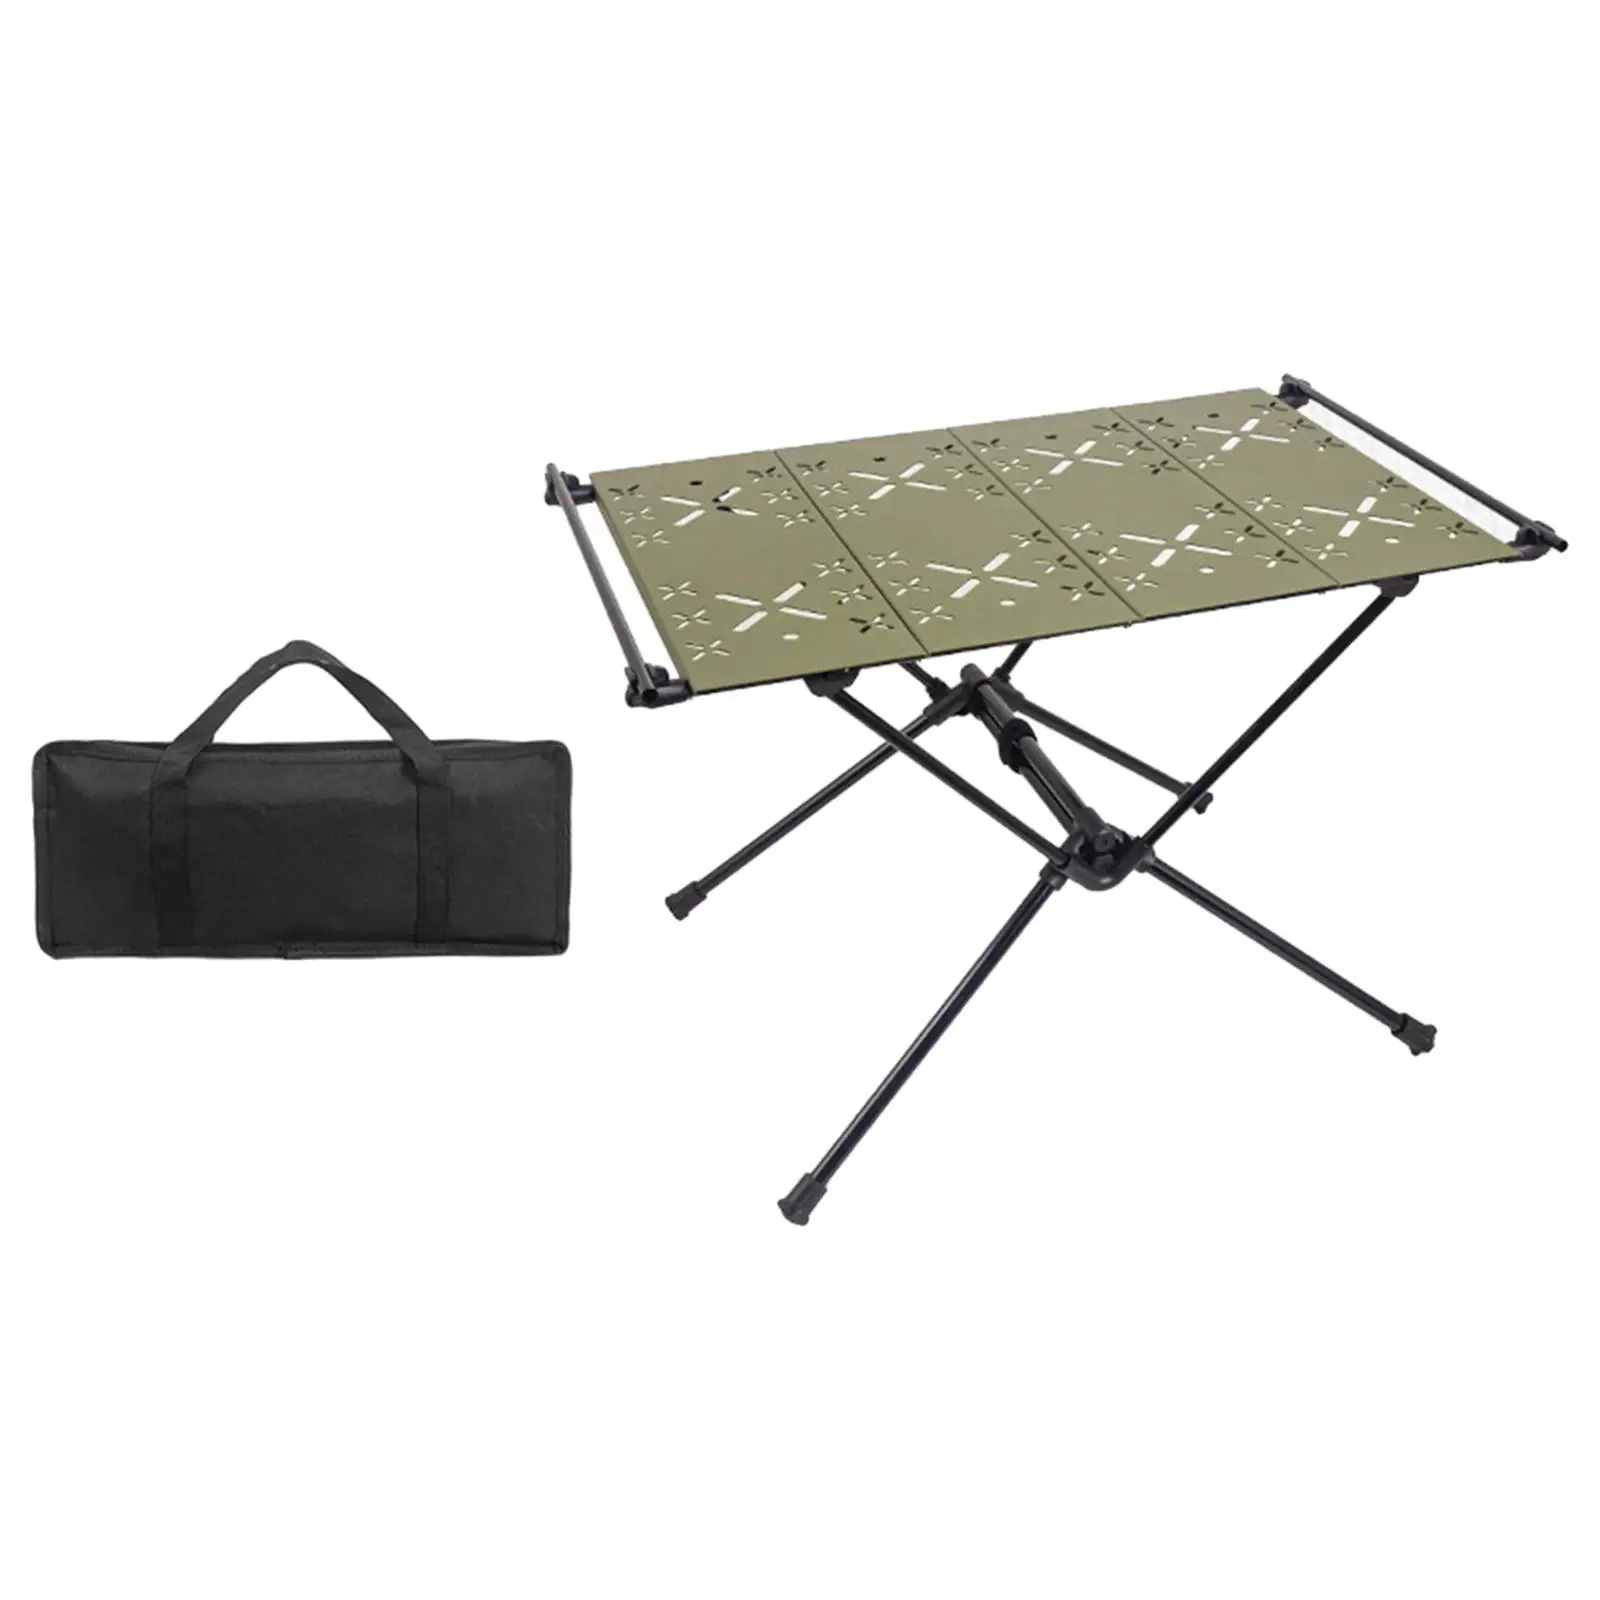 Foldable Camping Table Furniture Camp Table with Carry Bag Beach Table Outdoor Foldable Table for Garden Travel BBQ Patio Yard